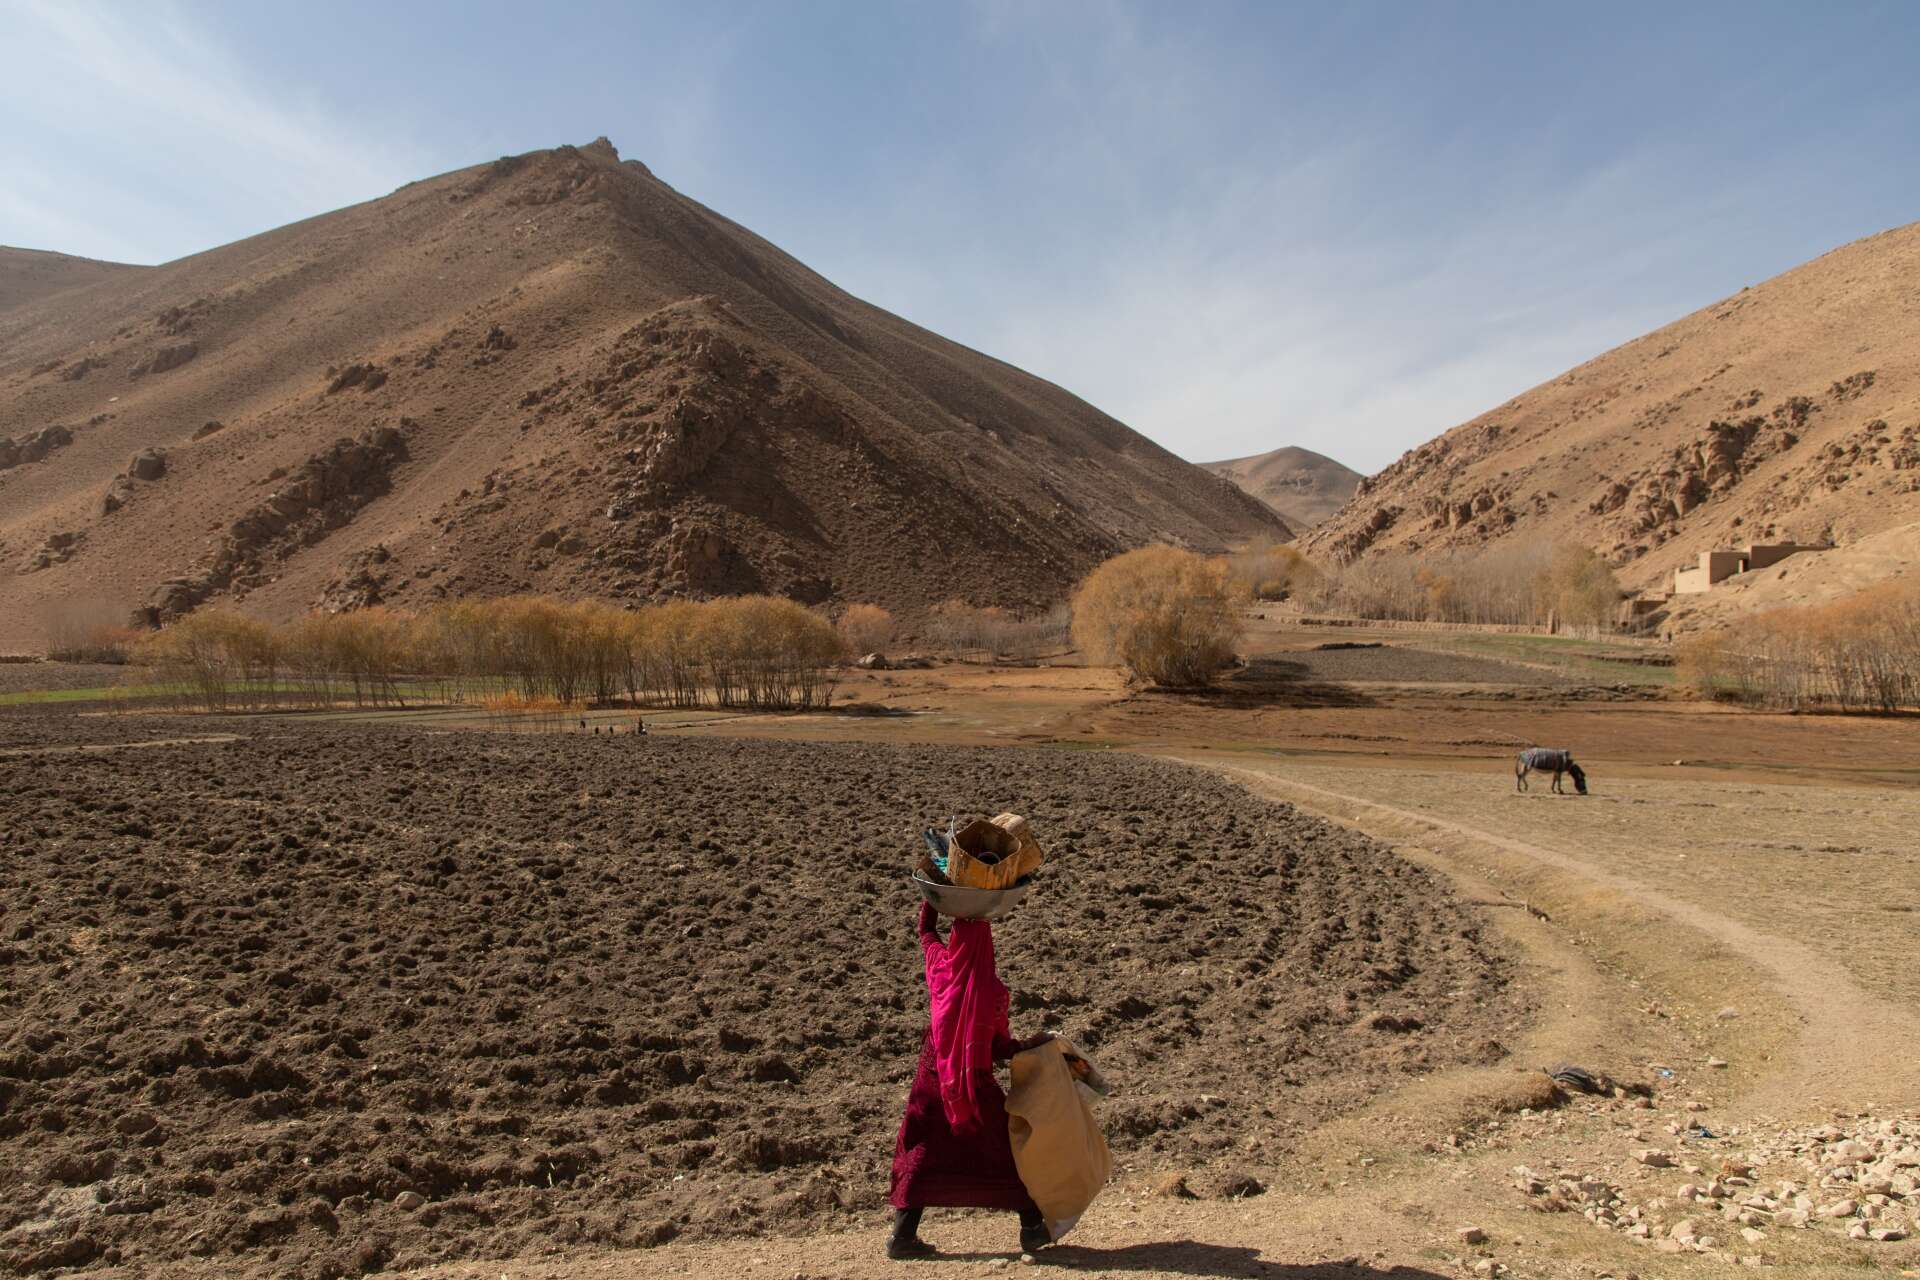 A woman walks through a drought stricken landscape while carrying supplies.